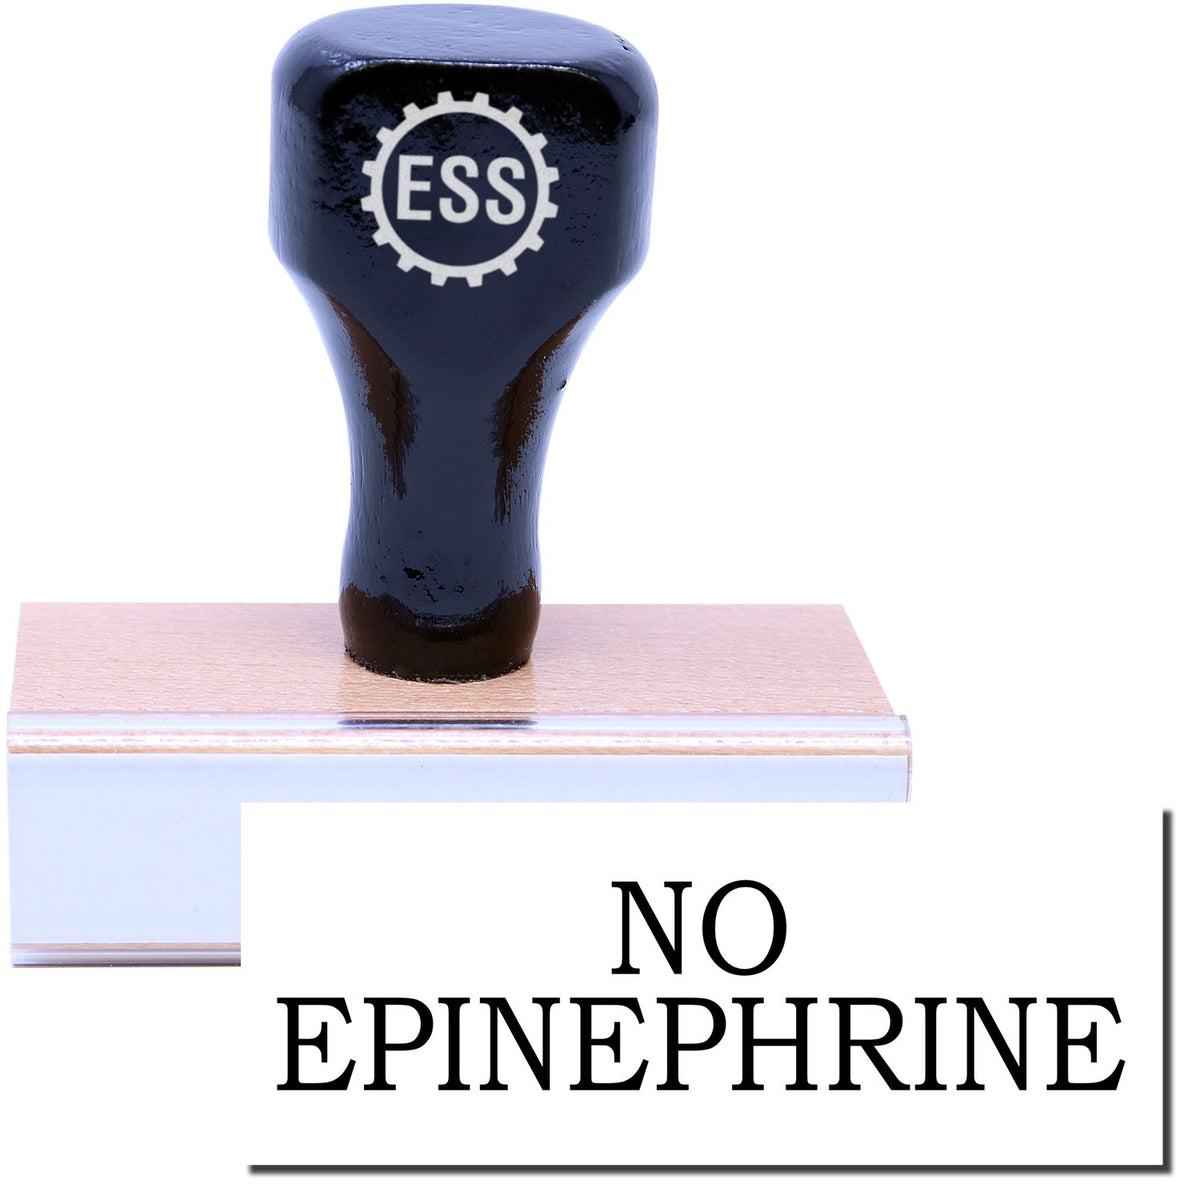 A stock office medical rubber stamp with a stamped image showing how the text &quot;NO EPINEPHRINE&quot; is displayed after stamping.